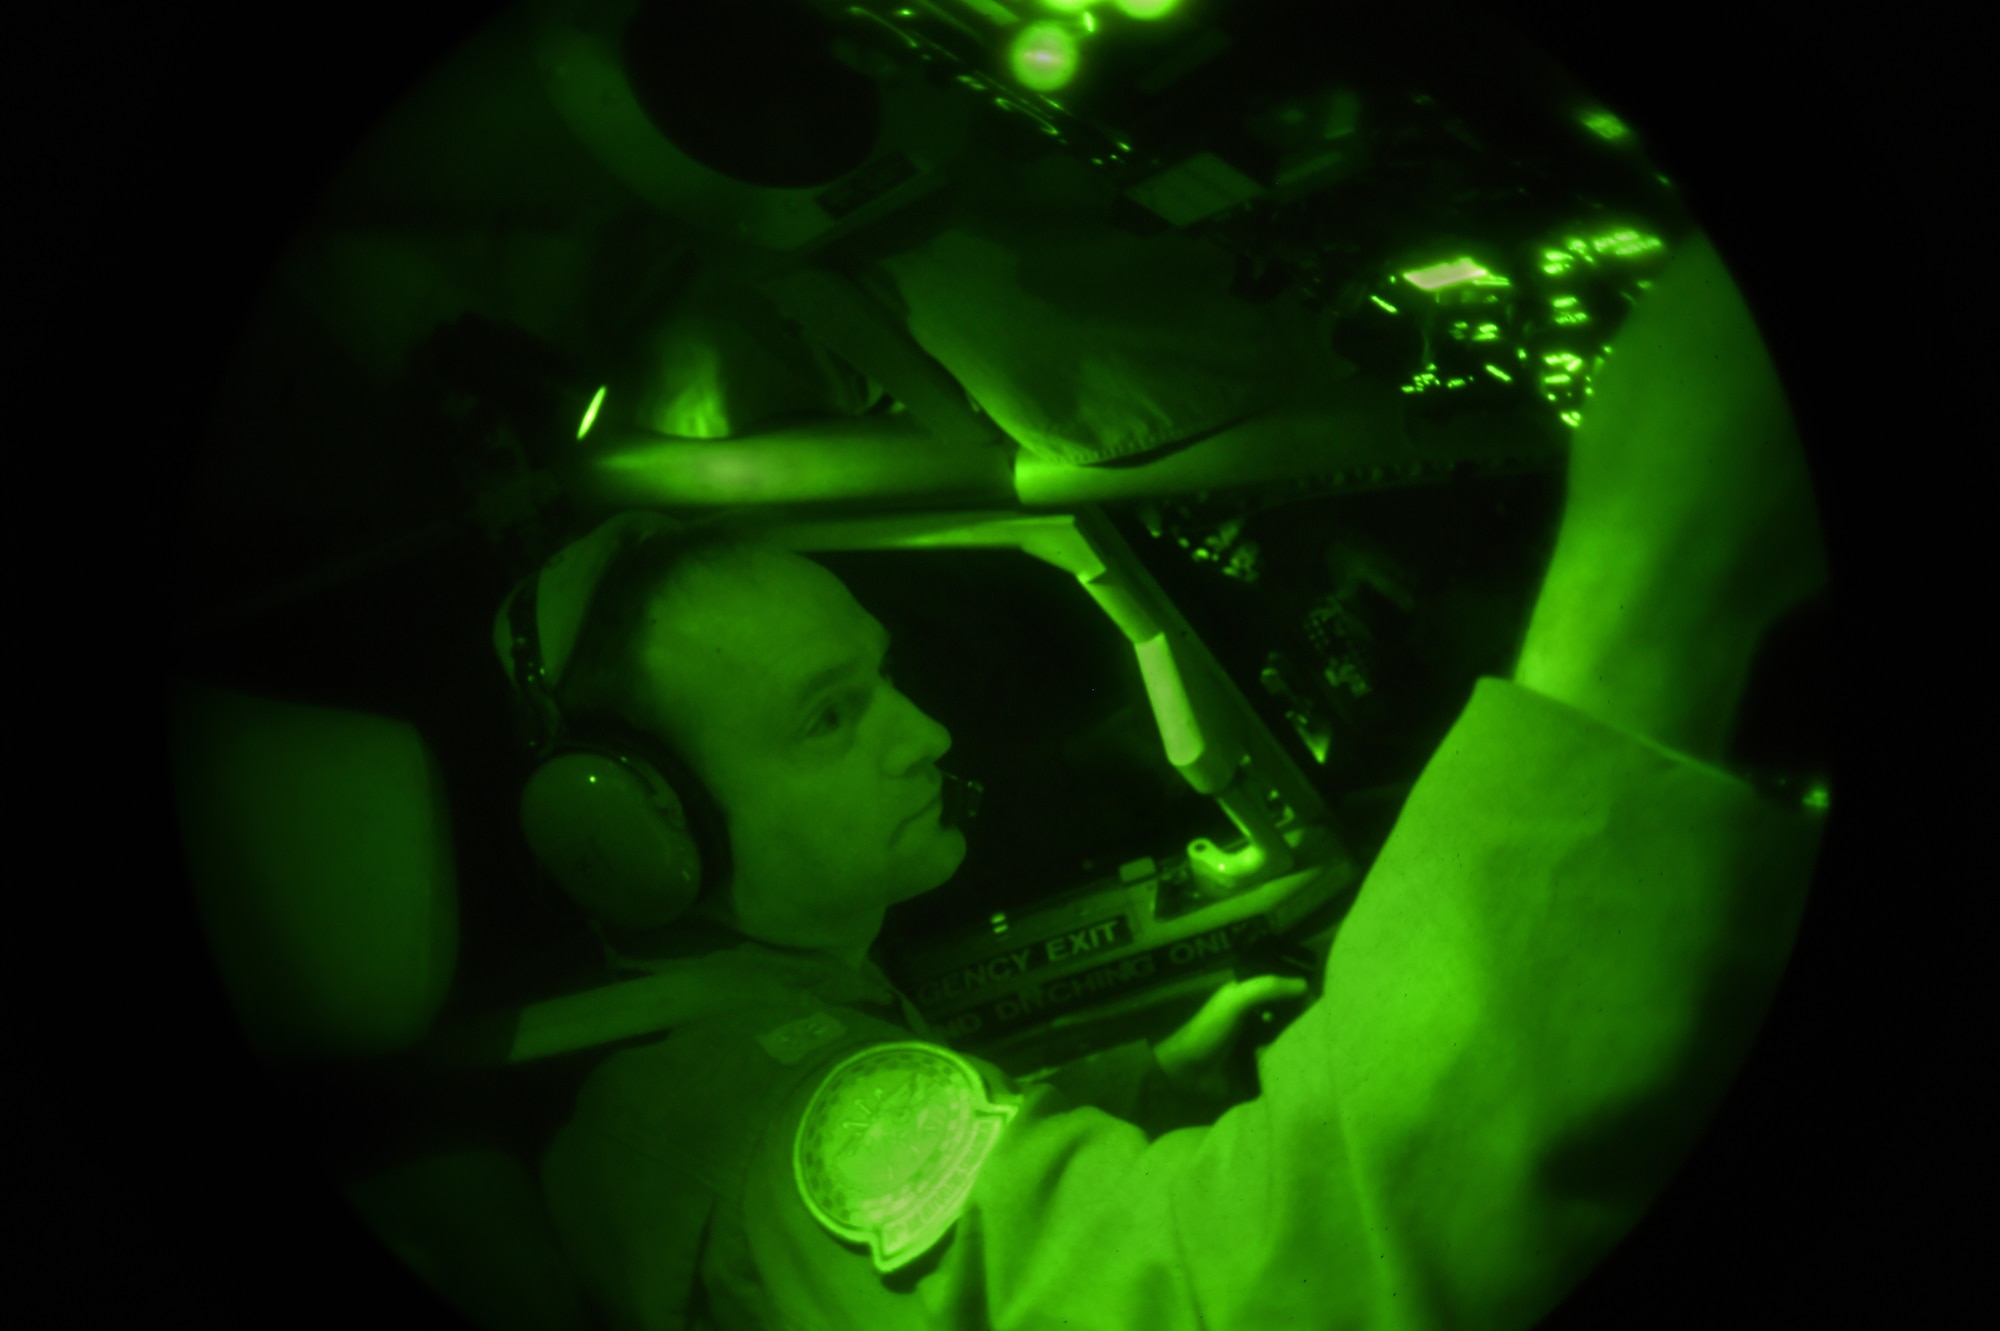 Lt. Col. Rich Day, 74th Air Refueling Squadron pilot, operates the controls of a 434th Air Refueling Wing KC-135R Stratotanker during a nighttime aerial refueling mission over Southern Kansas, Oct. 21, 2015. Pilots rely on illuminated instruments that appear green in the photo due to the use of a night-vision lens. (U.S. Air Force photo/Tech. Sgt. Benjamin Mota)